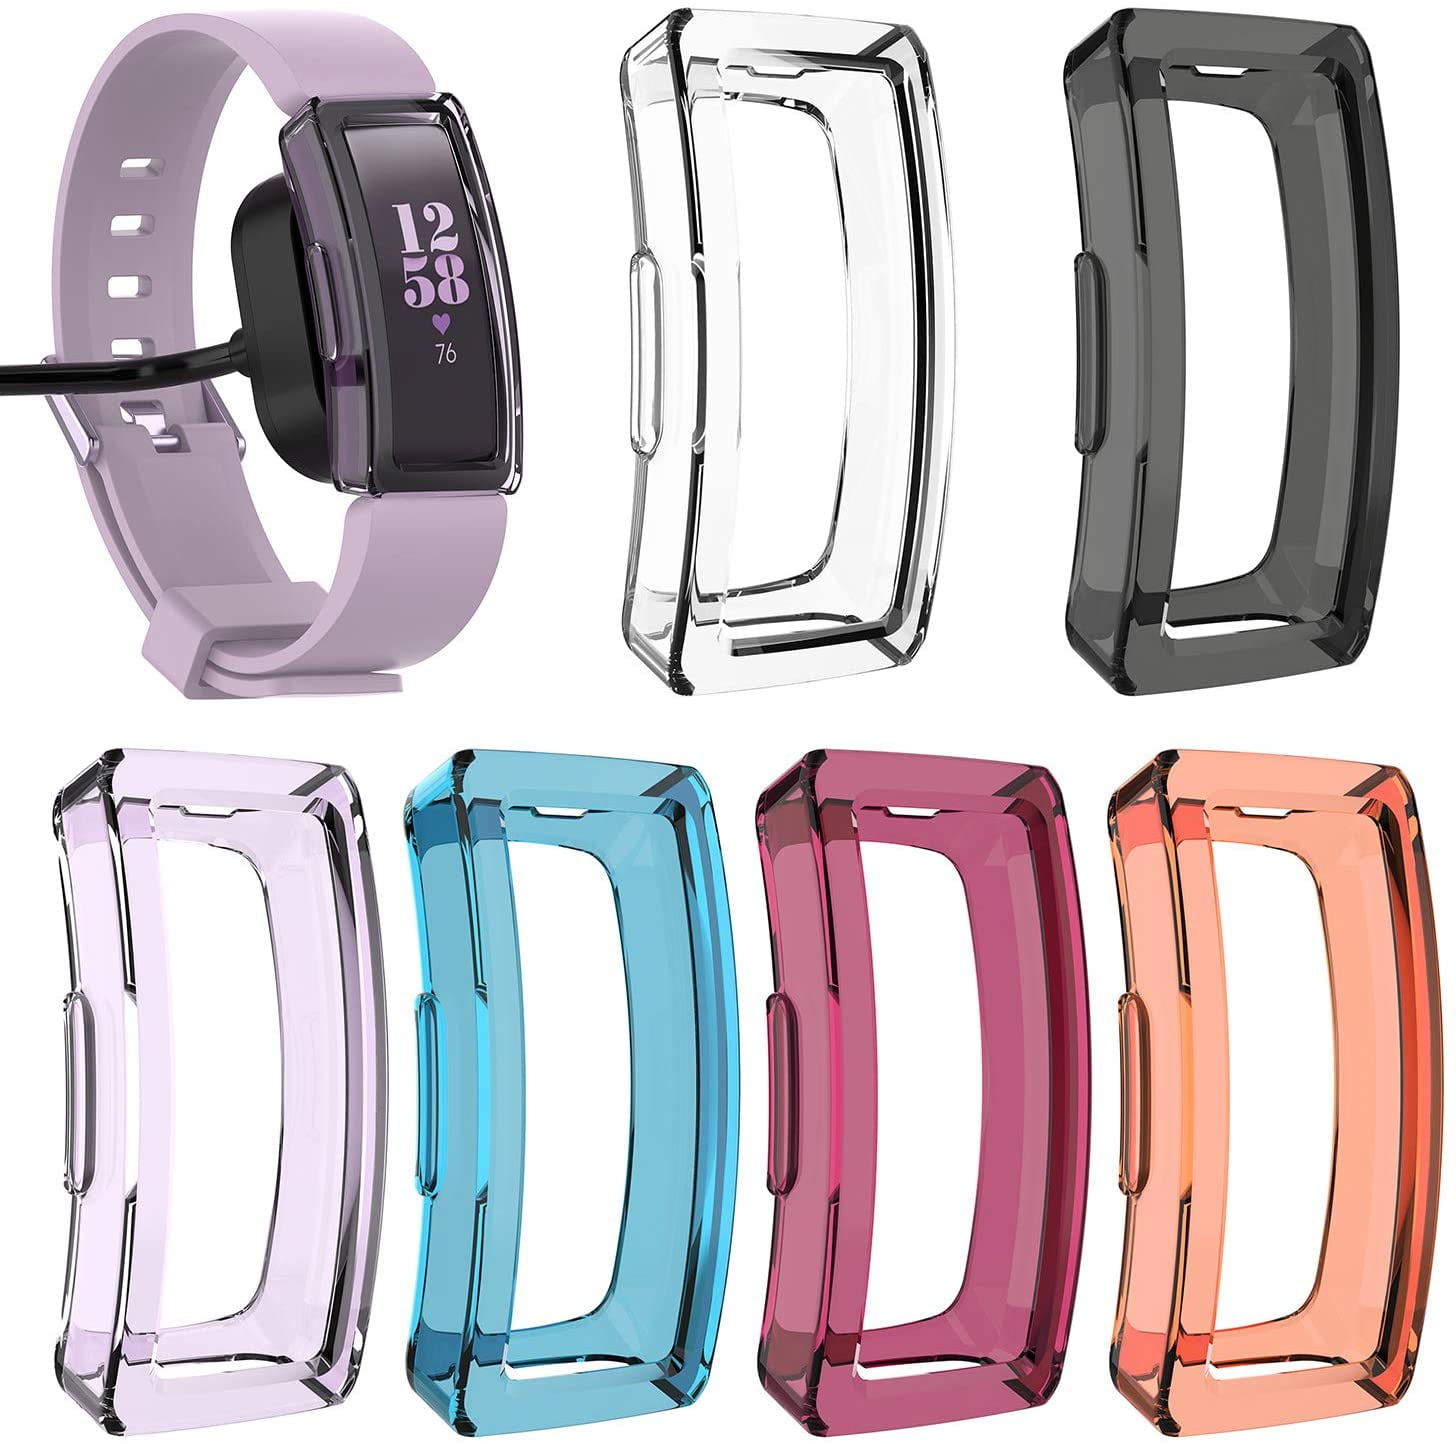 6 Colors Multi-Colors Clear Soft Flexible TPU Protective Case Ultra-Thin Bumper Shell for Fitbit Inspire/Inspire HR Smartwatch Protector Case for Fitbit Inspire & Inspire HR 6 Pack